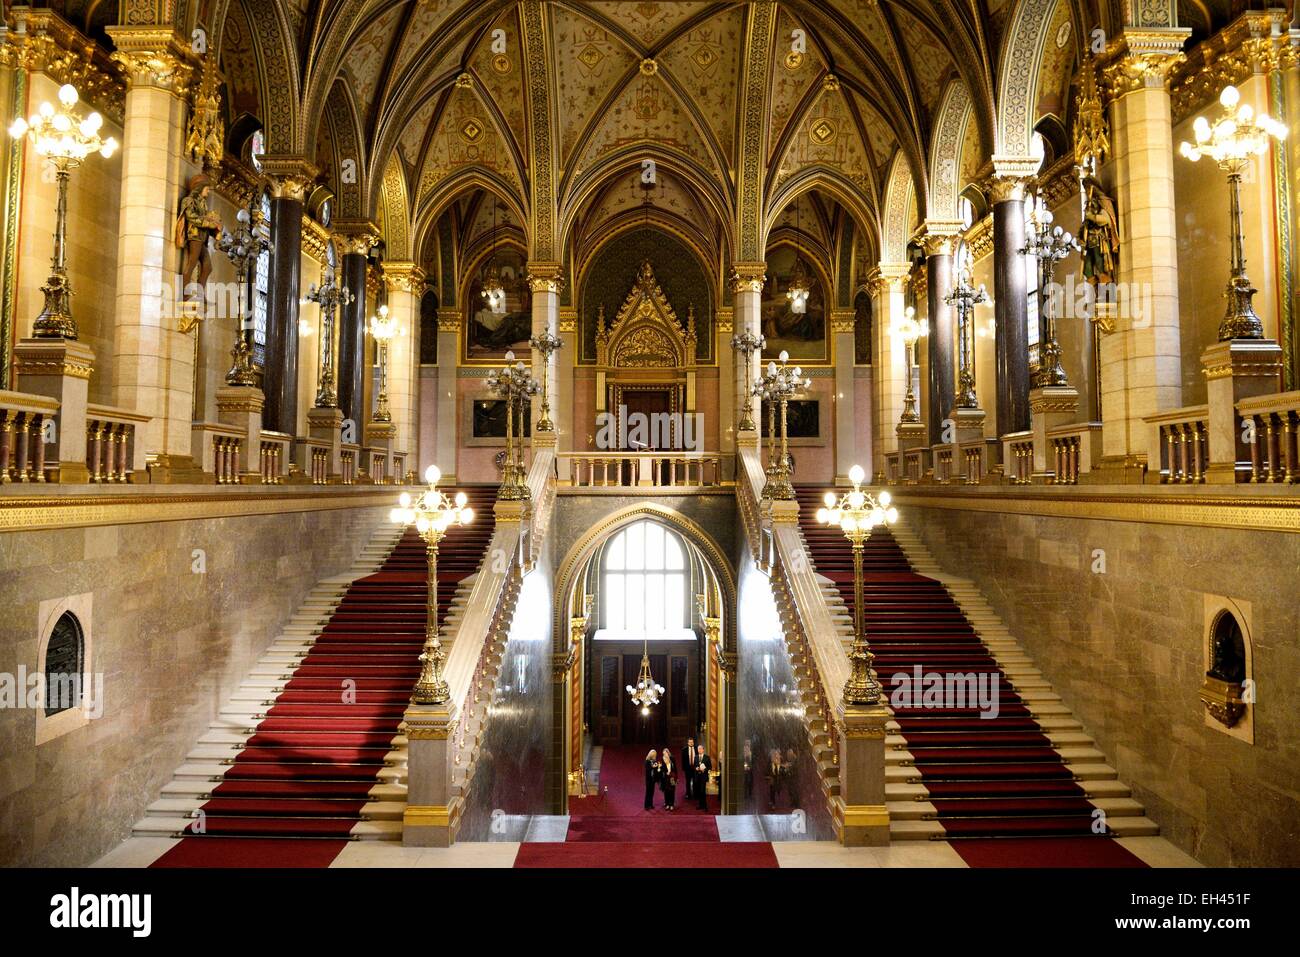 Hungary, Budapest, Pest, listed as World Heritage by UNESCO, main entrance hall with stairs inside the Hungarian Parliament Building, a large neo gothic monument built in the early 20th century, seat of the National Assembly of Hungary Stock Photo